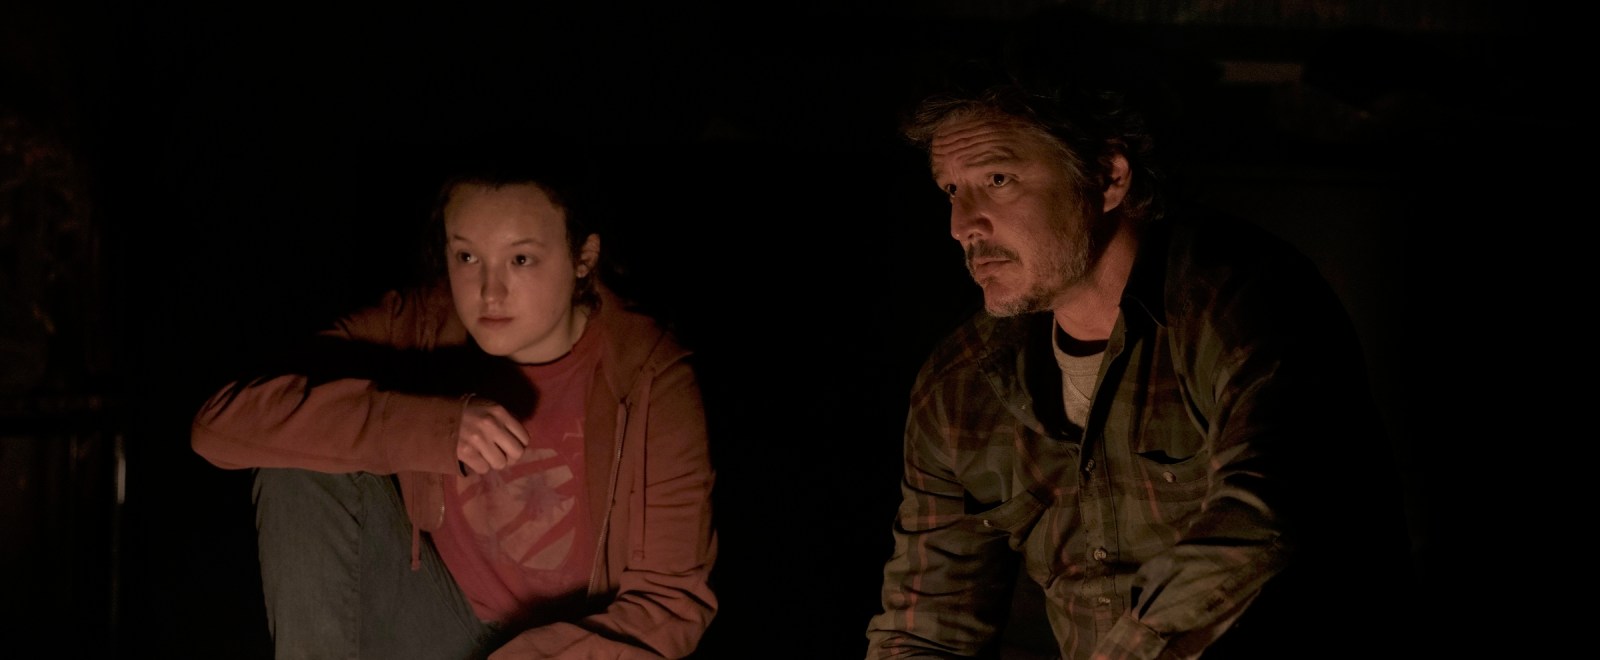 The Last of Us: The HBO show's Season 1 finale makes a disastrous choice.